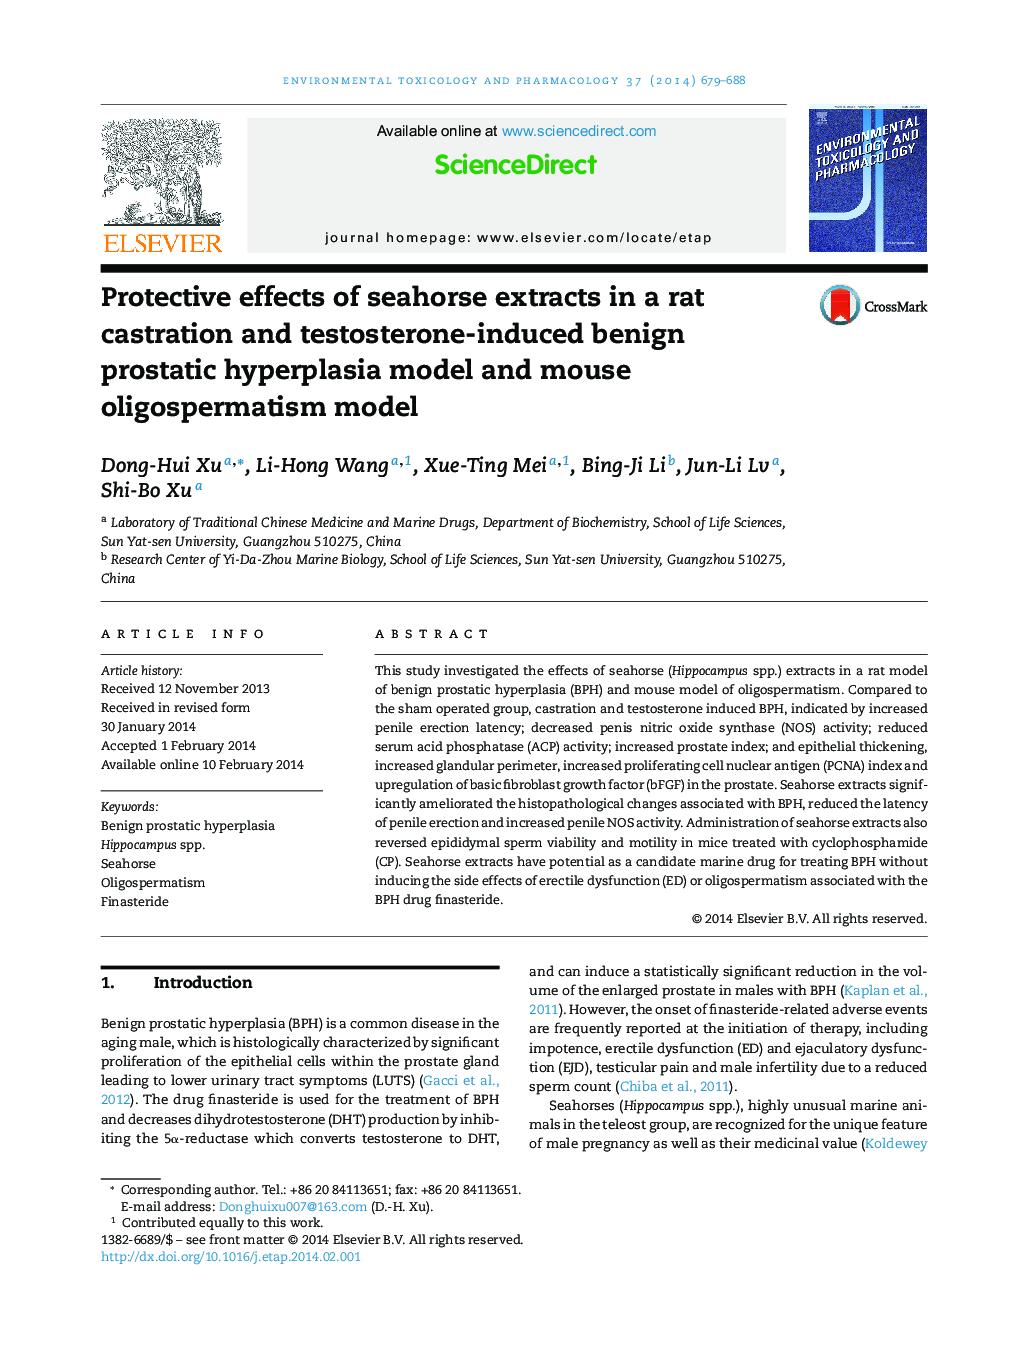 Protective effects of seahorse extracts in a rat castration and testosterone-induced benign prostatic hyperplasia model and mouse oligospermatism model